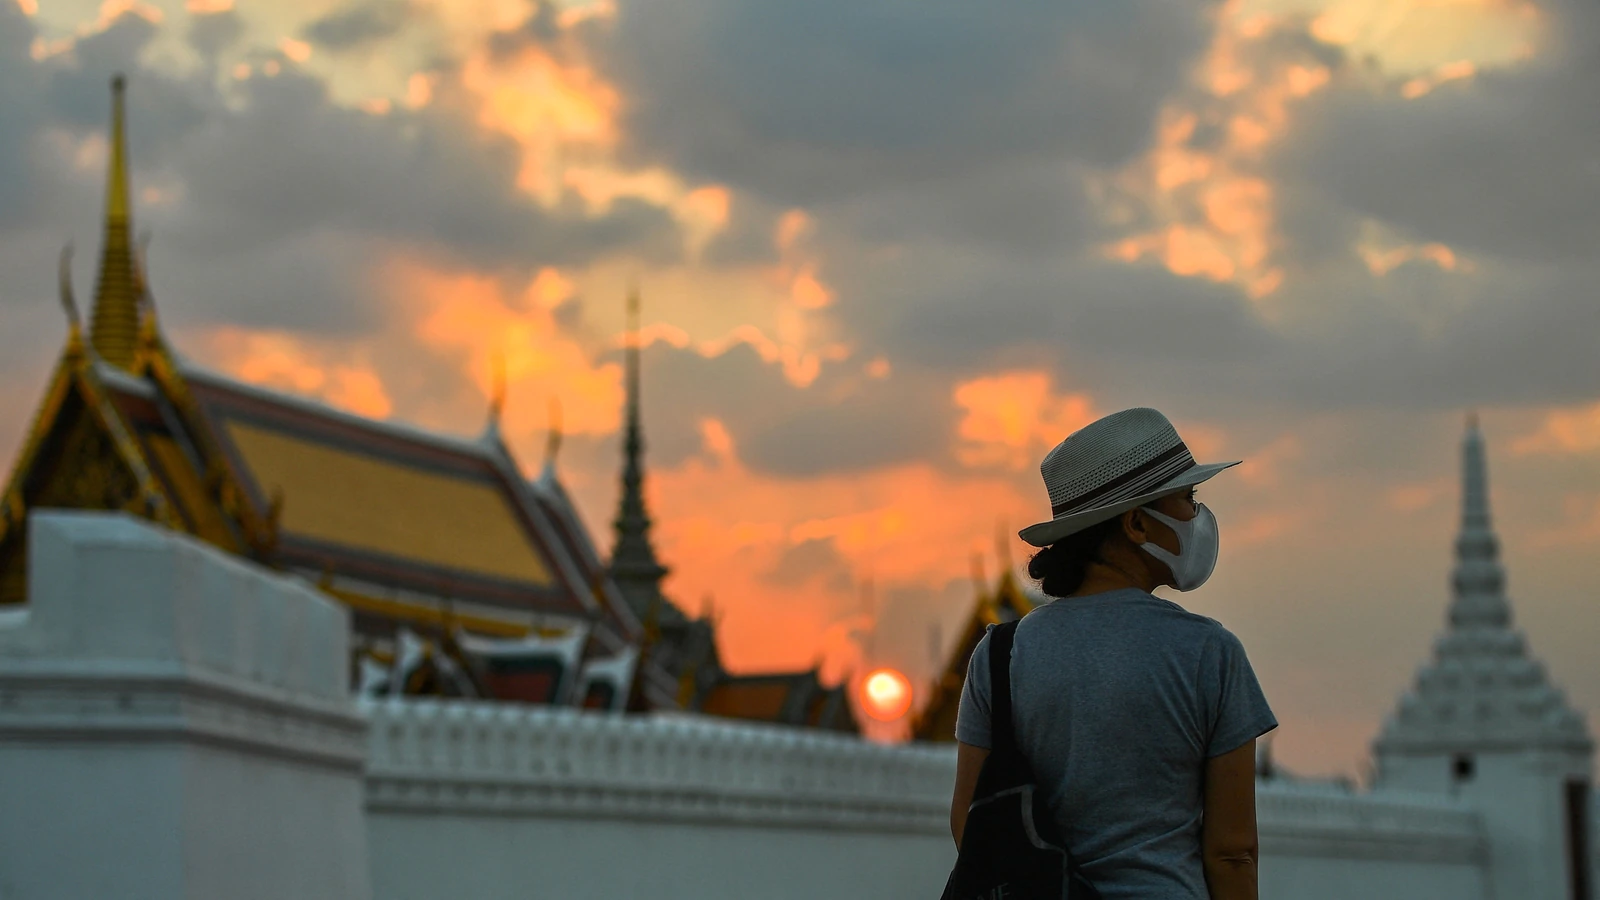 Thailand to relax entry rules for tourists to support economic recovery as war hits arrivals